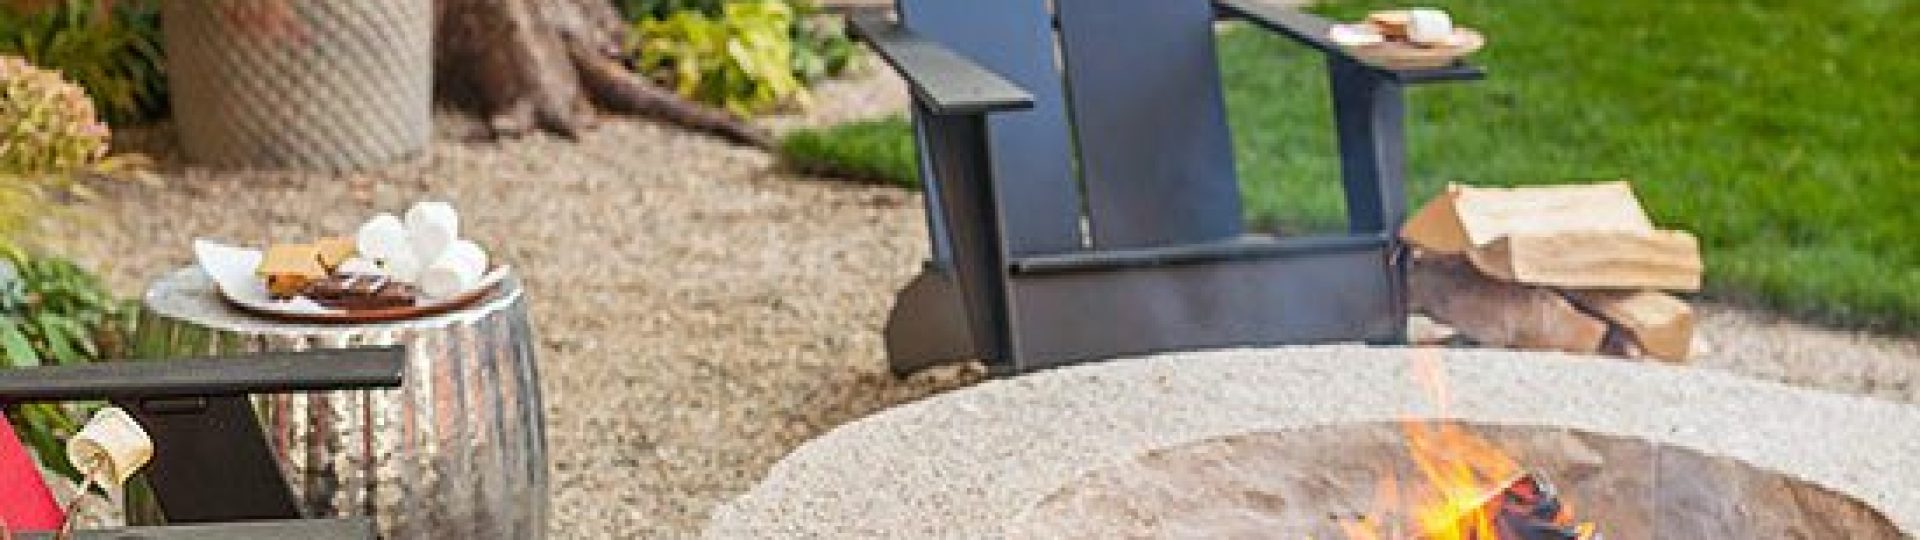 Chairs around a fire pit